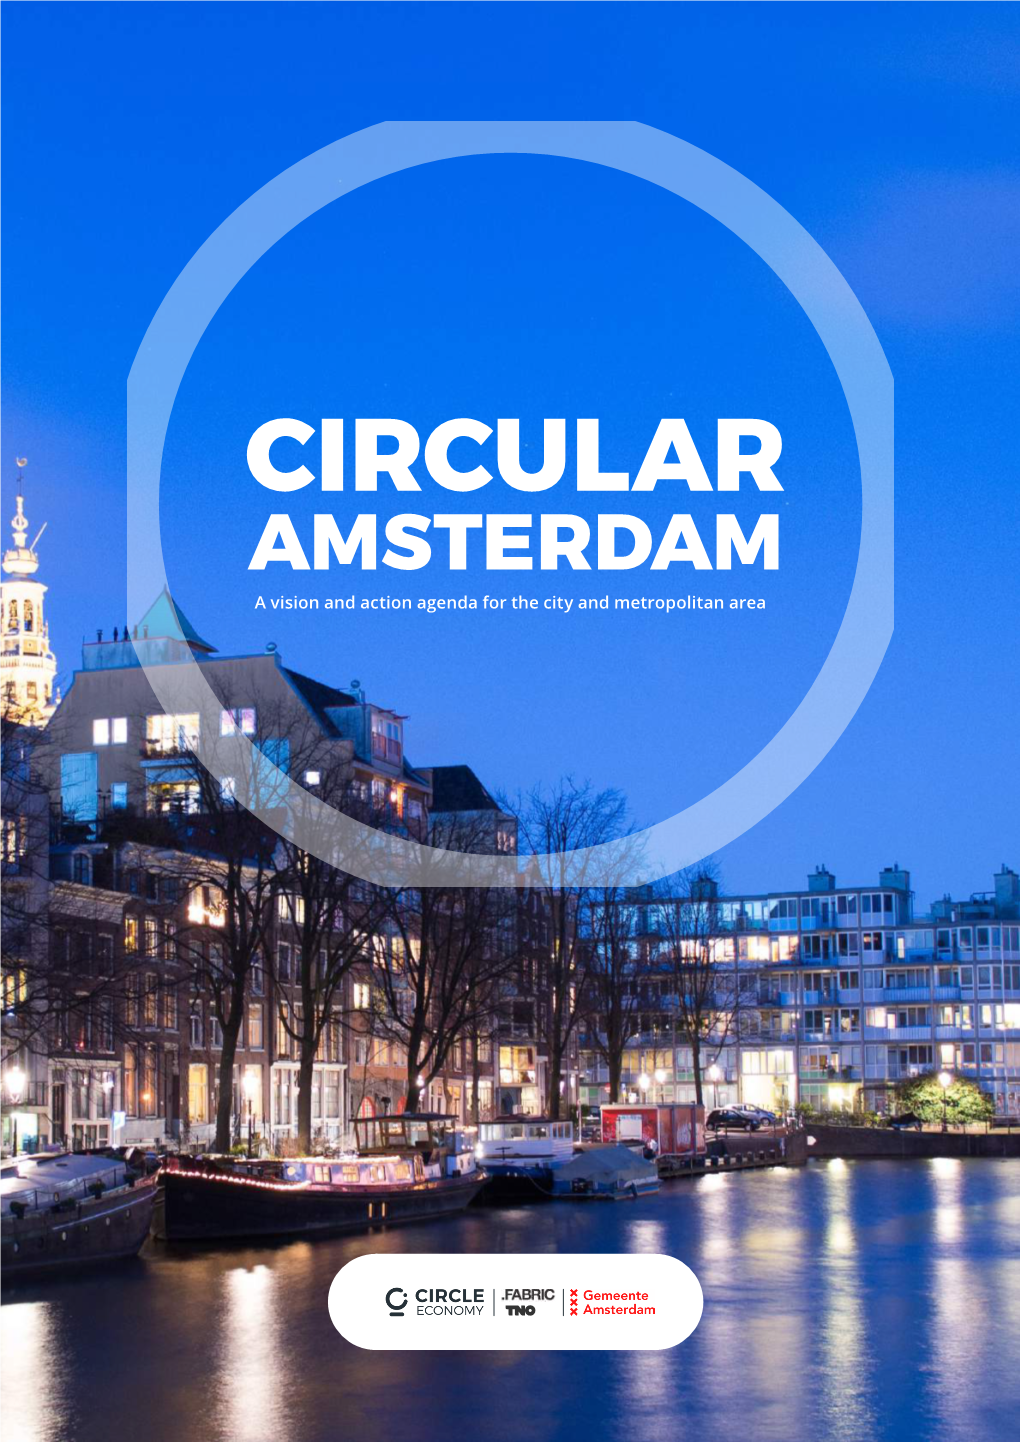 CIRCULAR AMSTERDAM a Vision and Action Agenda for the City and Metropolitan Area FOREWORD CONTENTS